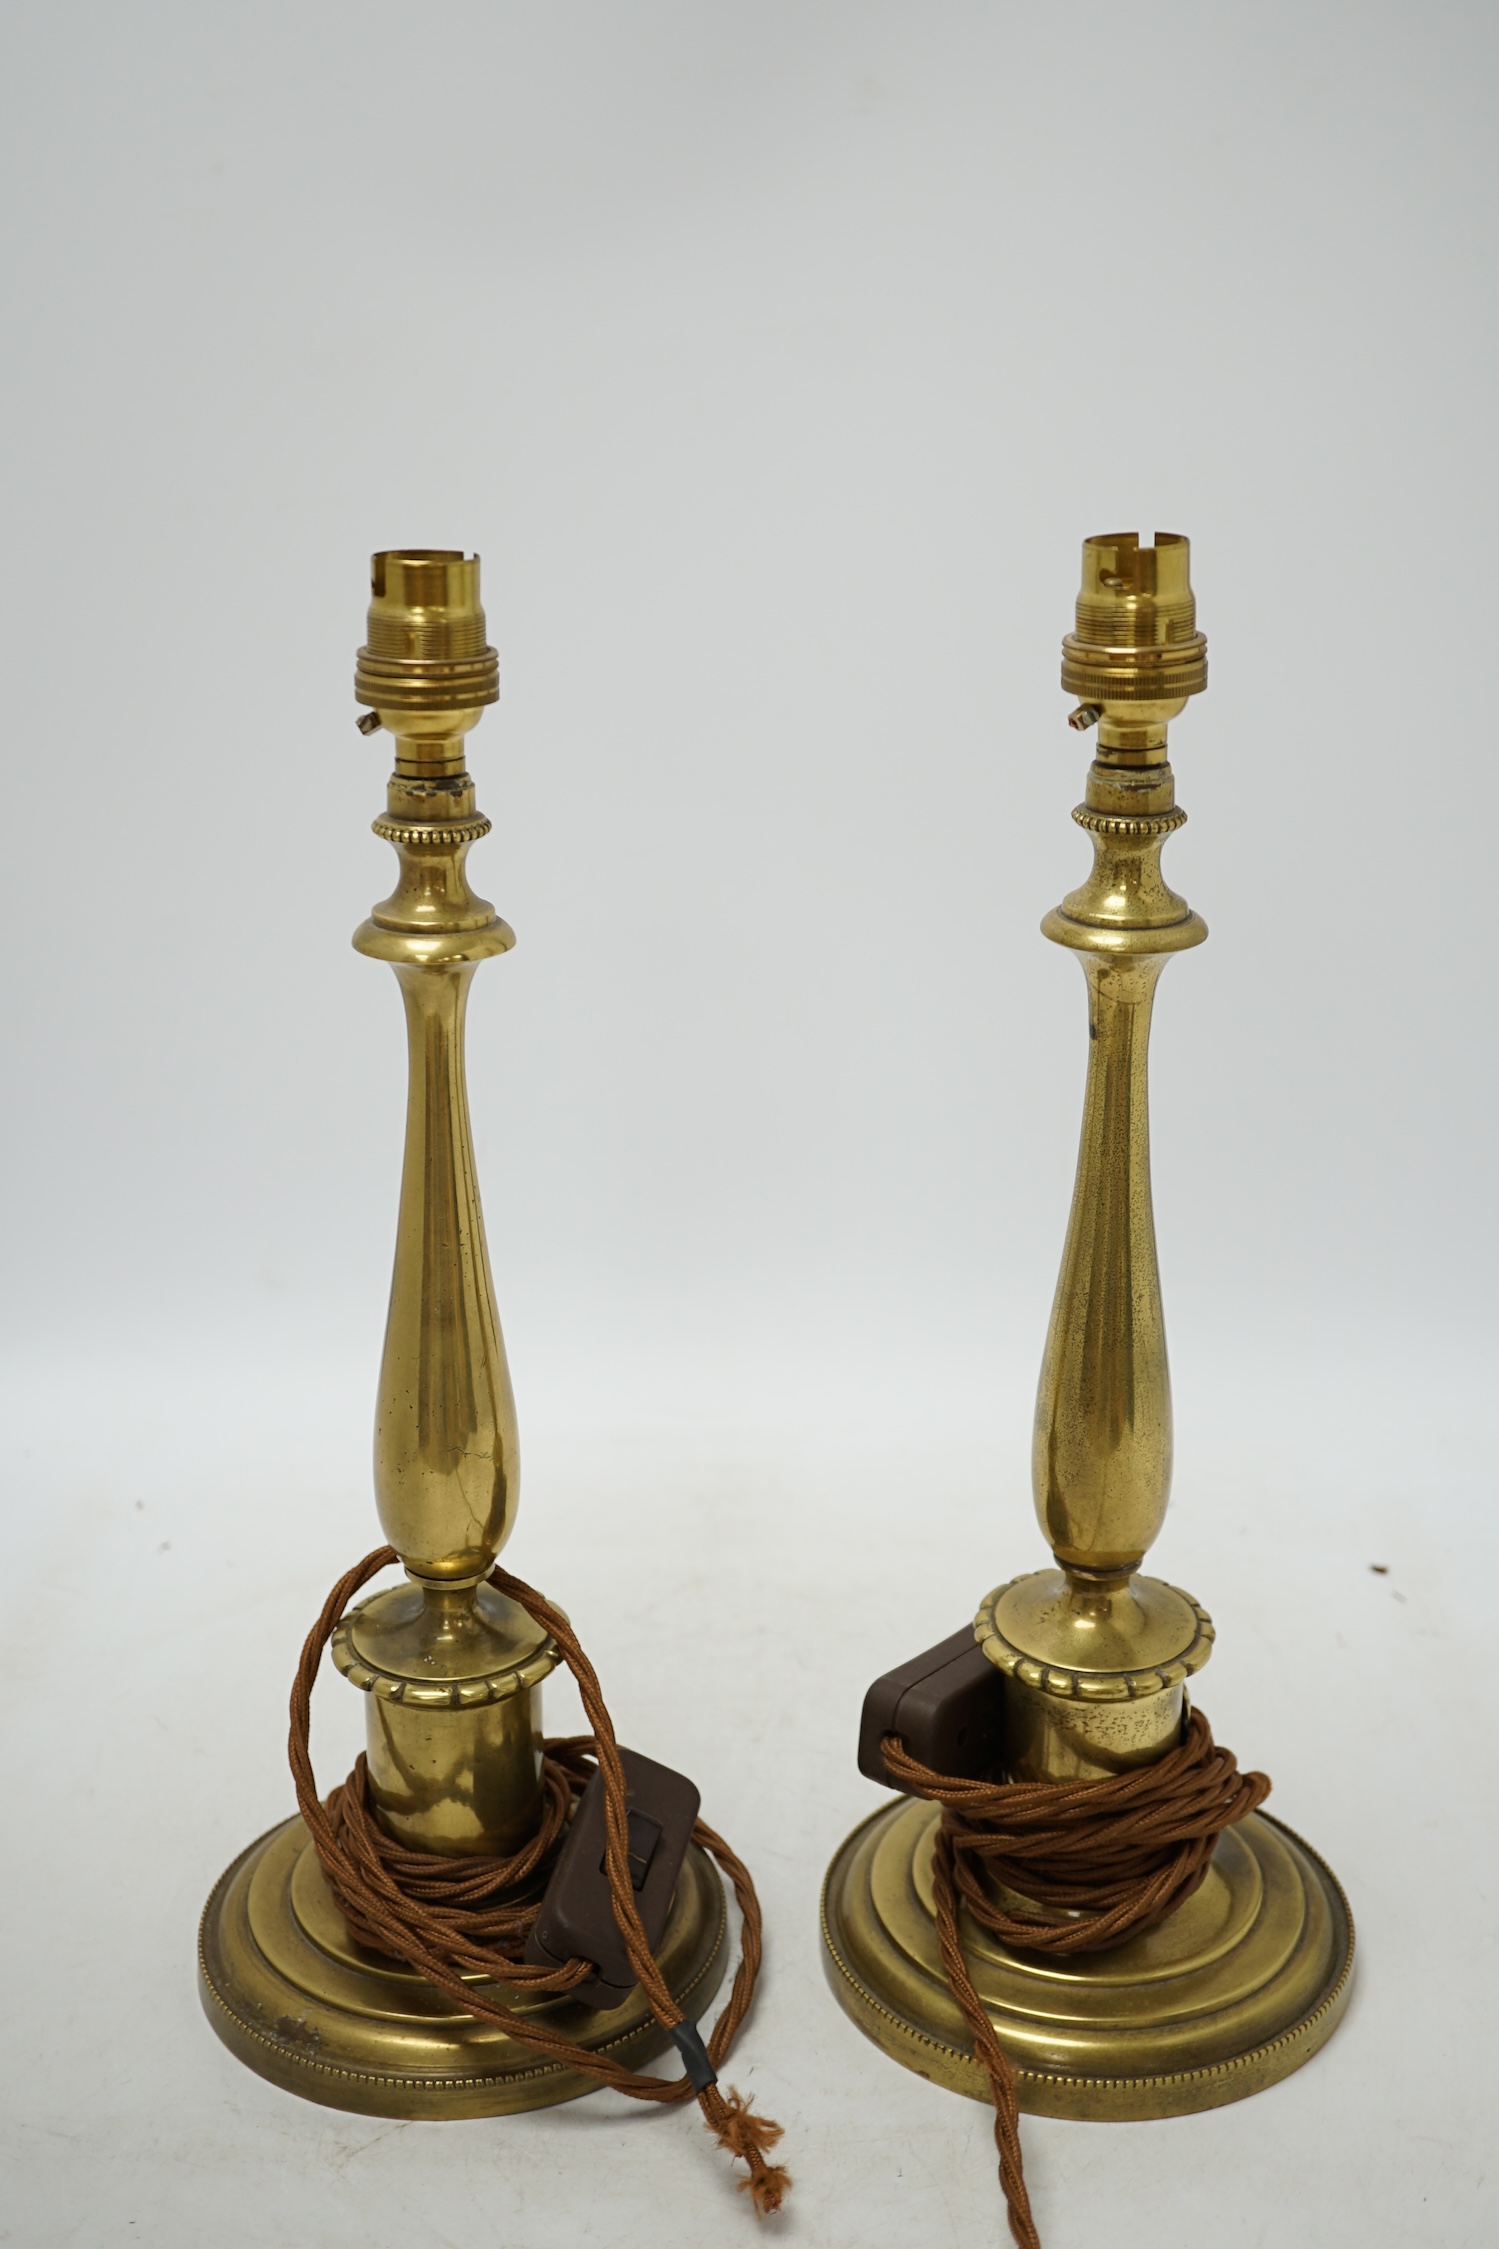 A pair of early 20th century brass table lamps, 36cm total height. Condition - fair, not tested